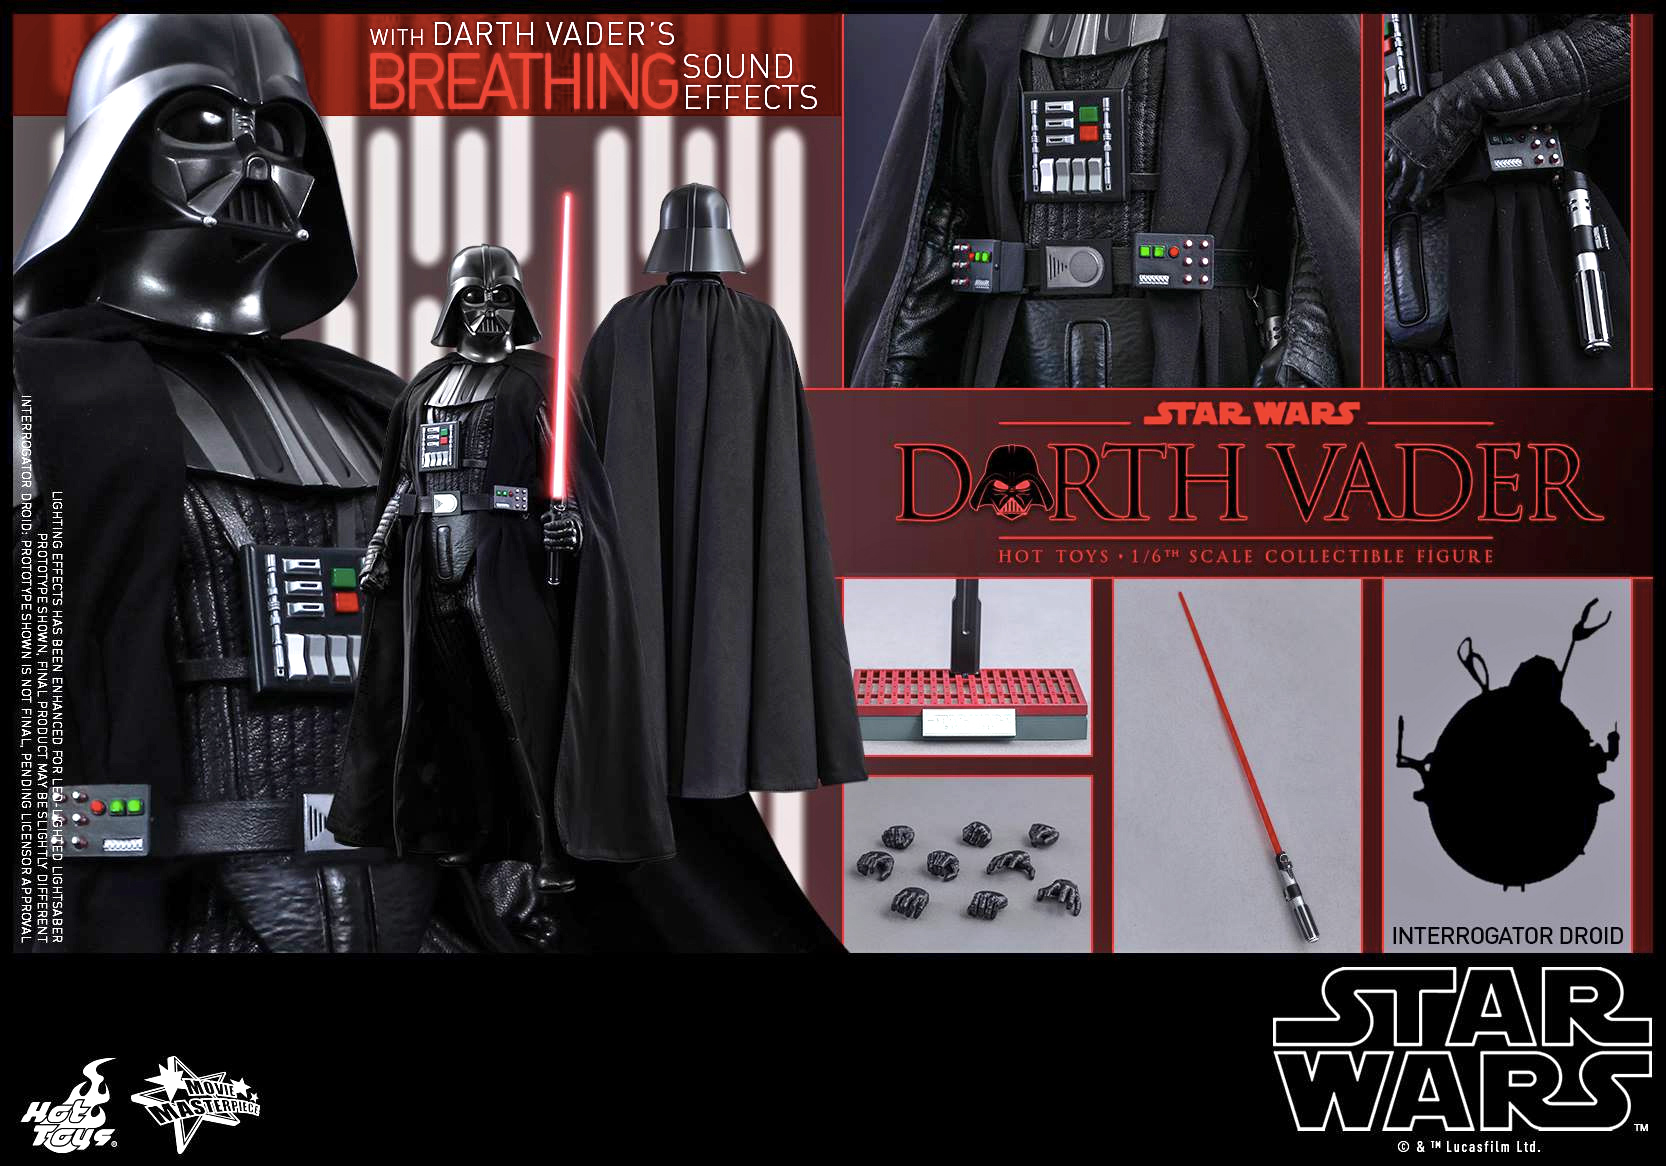 The Definitive Darth Vader Figure Even Has His Iconic Breathing Sounds